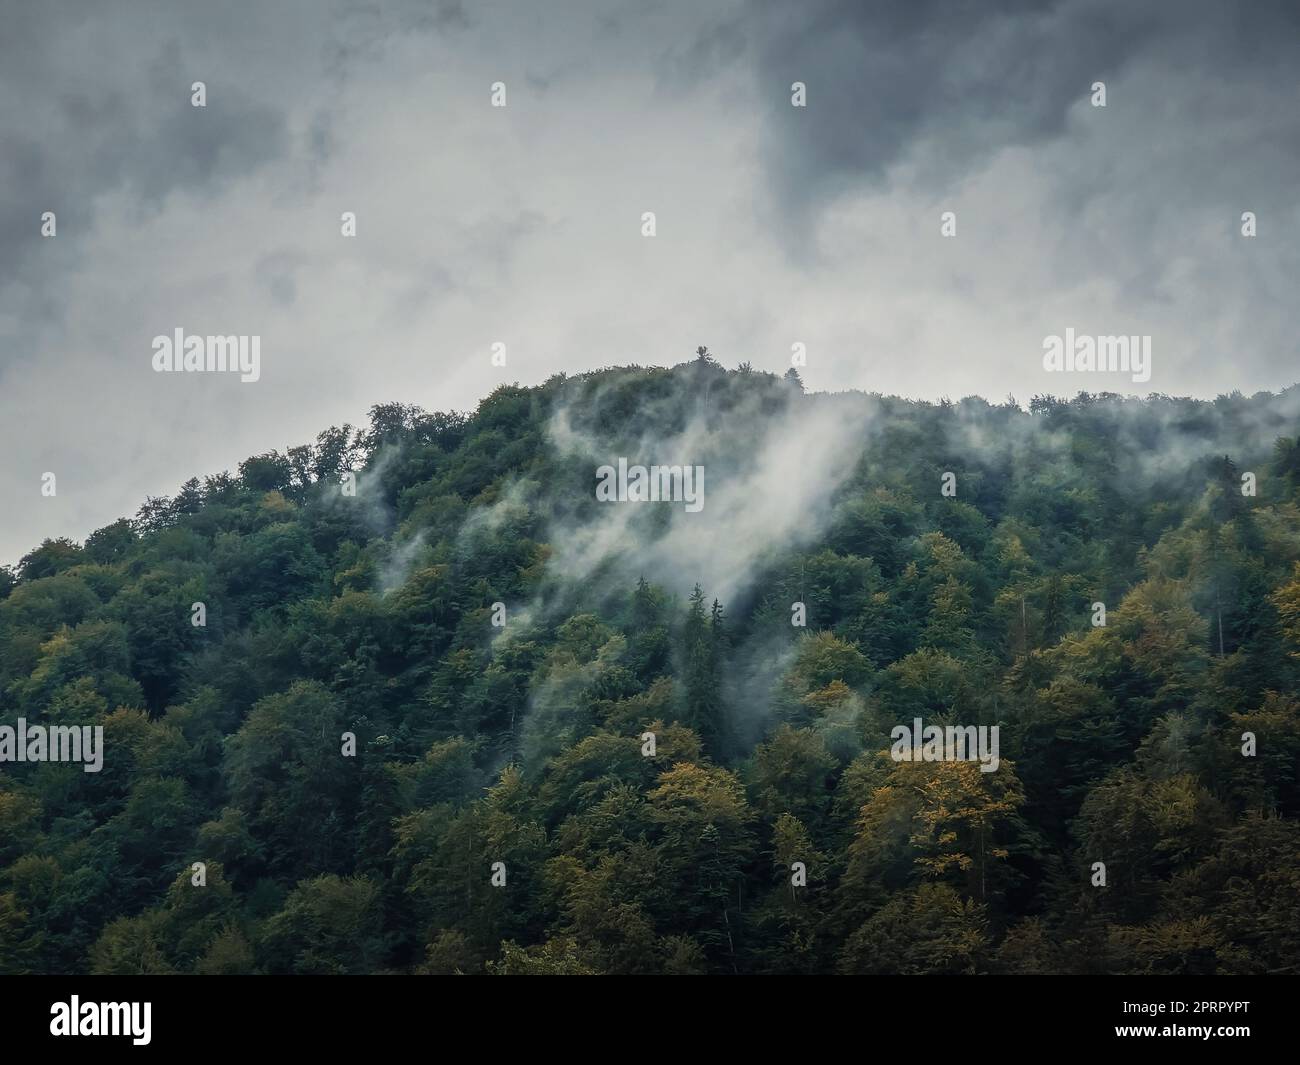 Peaceful fall scene with foggy clouds moving through the mixed forest on the top of a hill in a gloomy day. Natural autumn landscape in the woods, rainy weather with mist above the trees Stock Photo